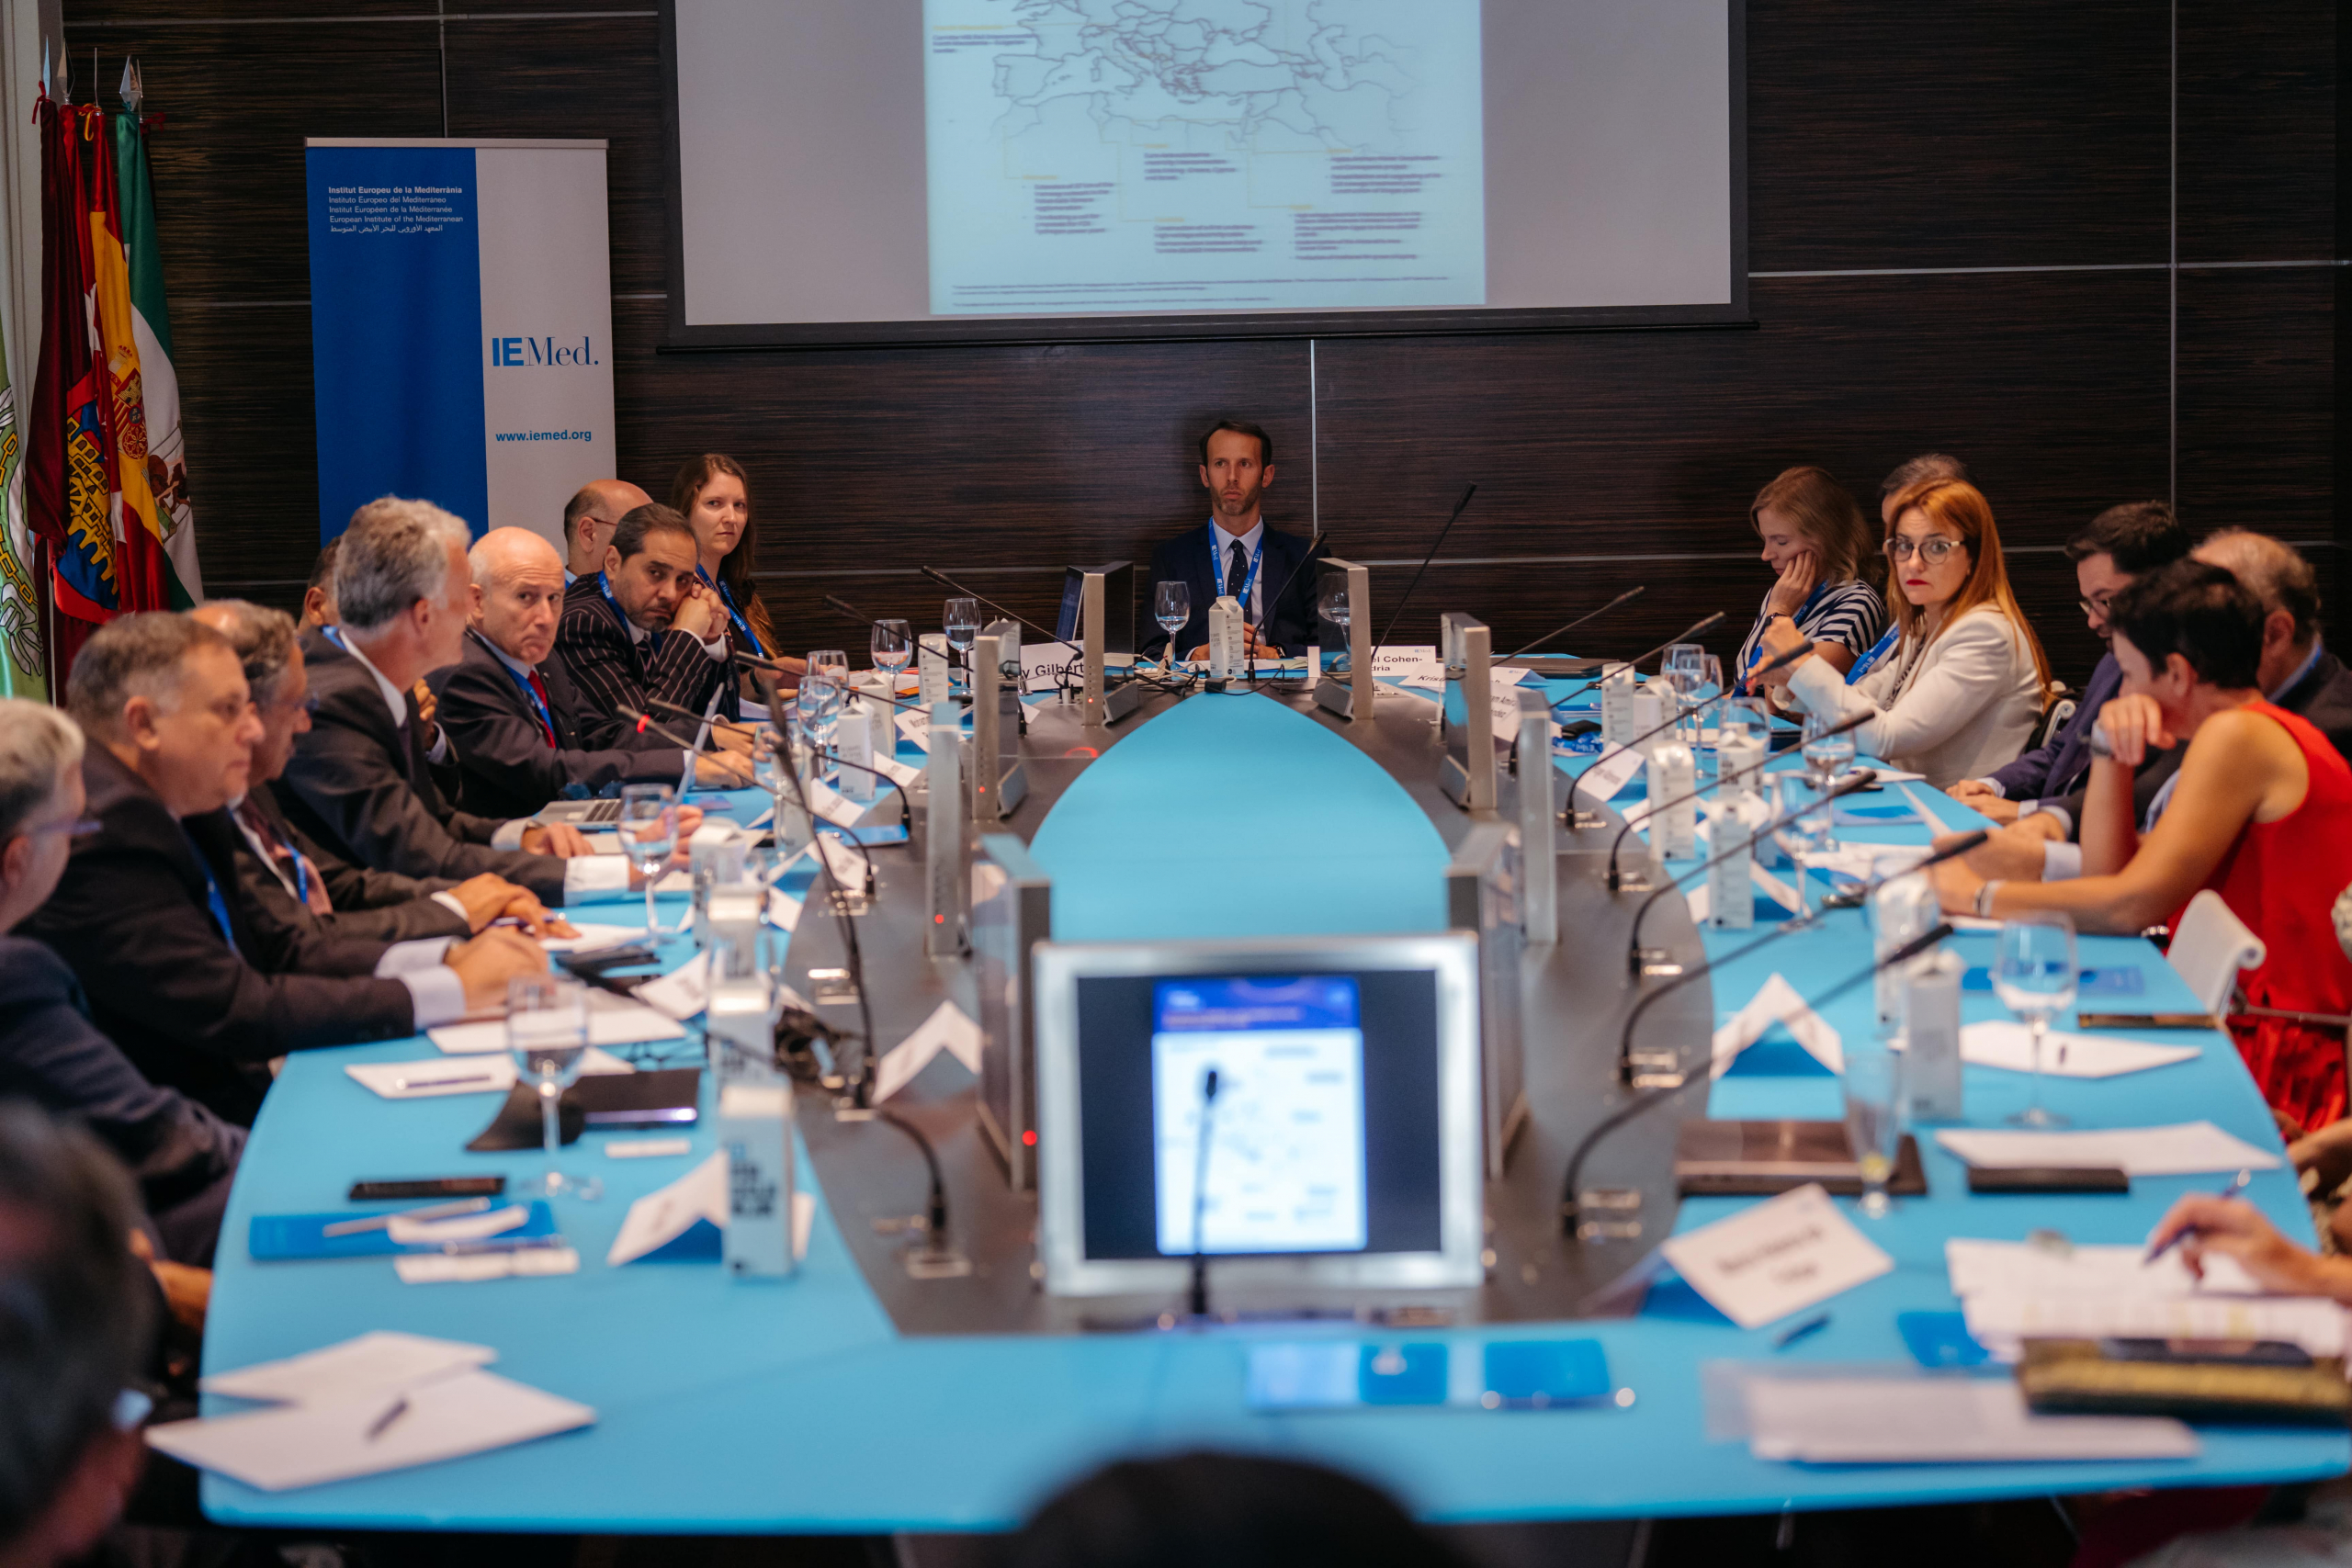 Multistakeholders Platform: Fostering Understanding Communication, Perceptions and Narratives in Euro-Mediterranean Relations